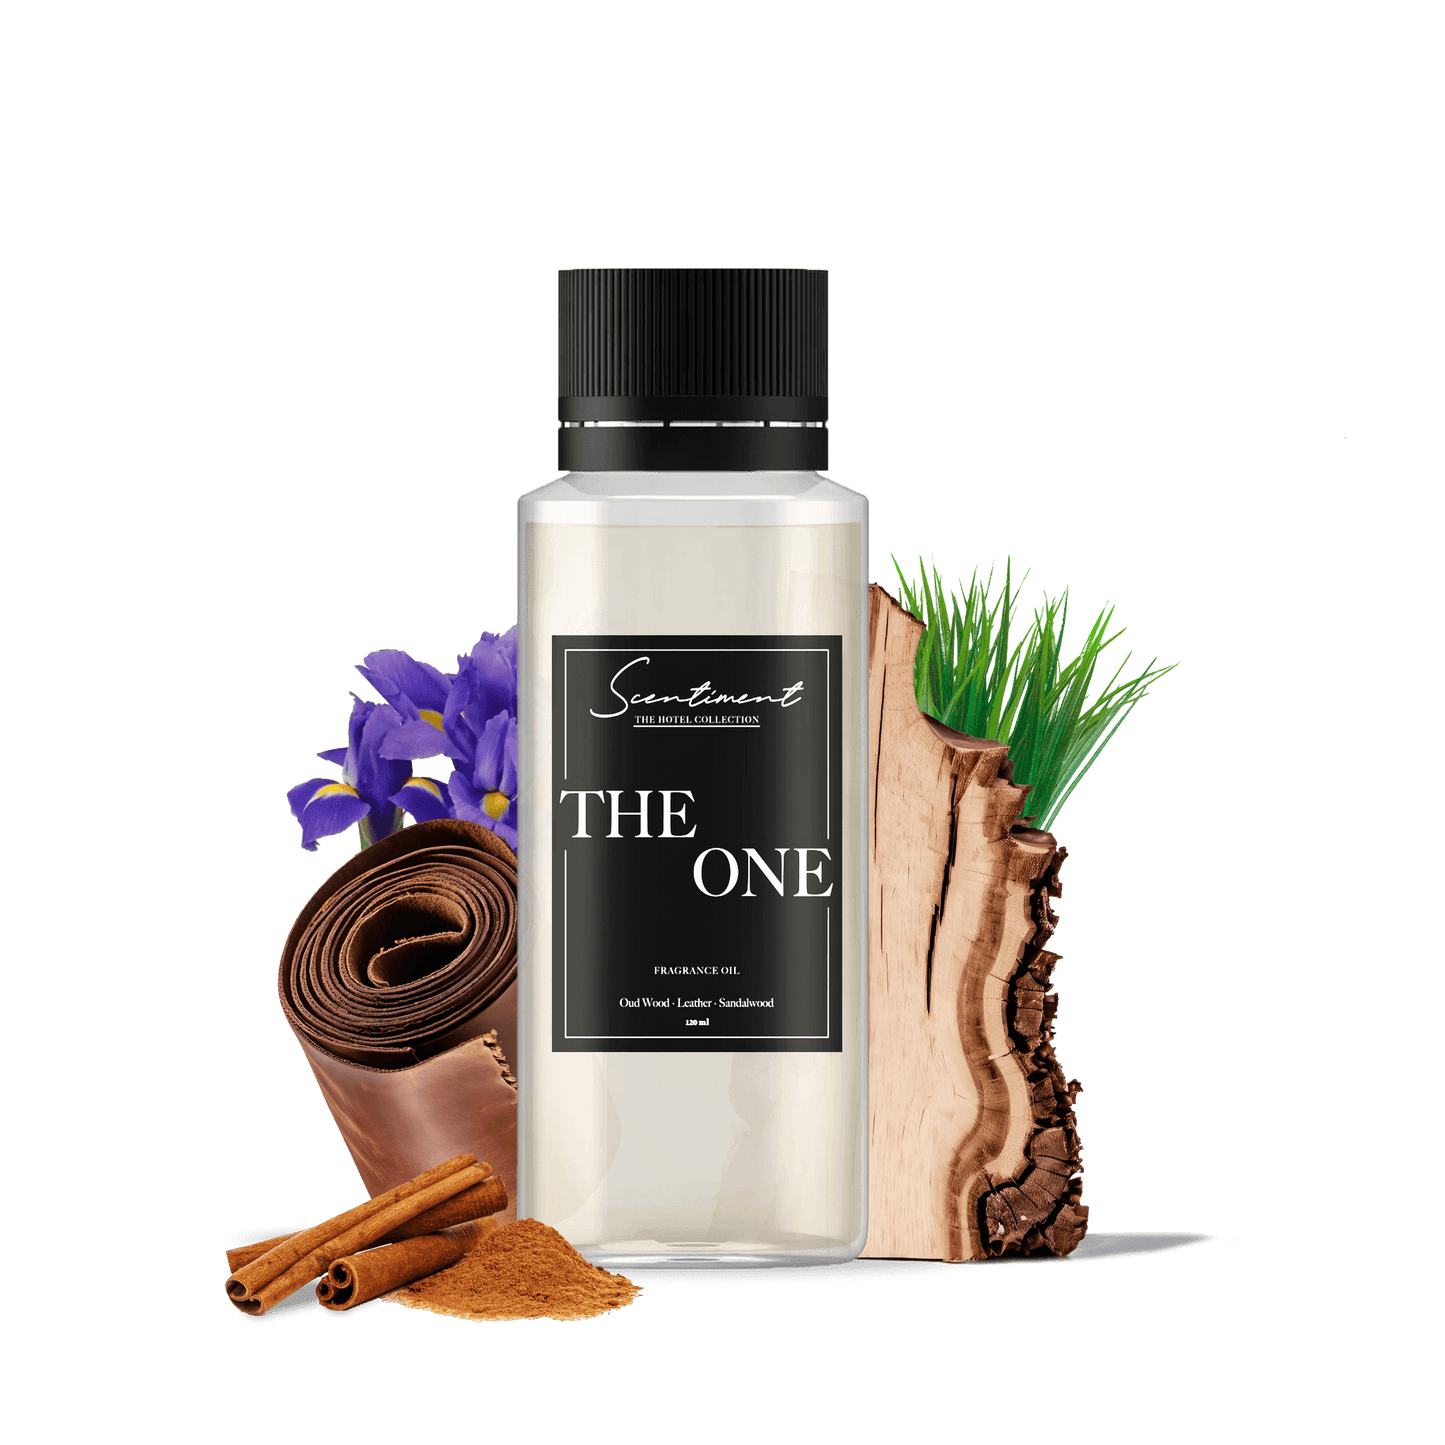 The One Fragrance Oil inspired by The One® Hotel, with notes of Oud Wood, Leather, and Sandalwood.